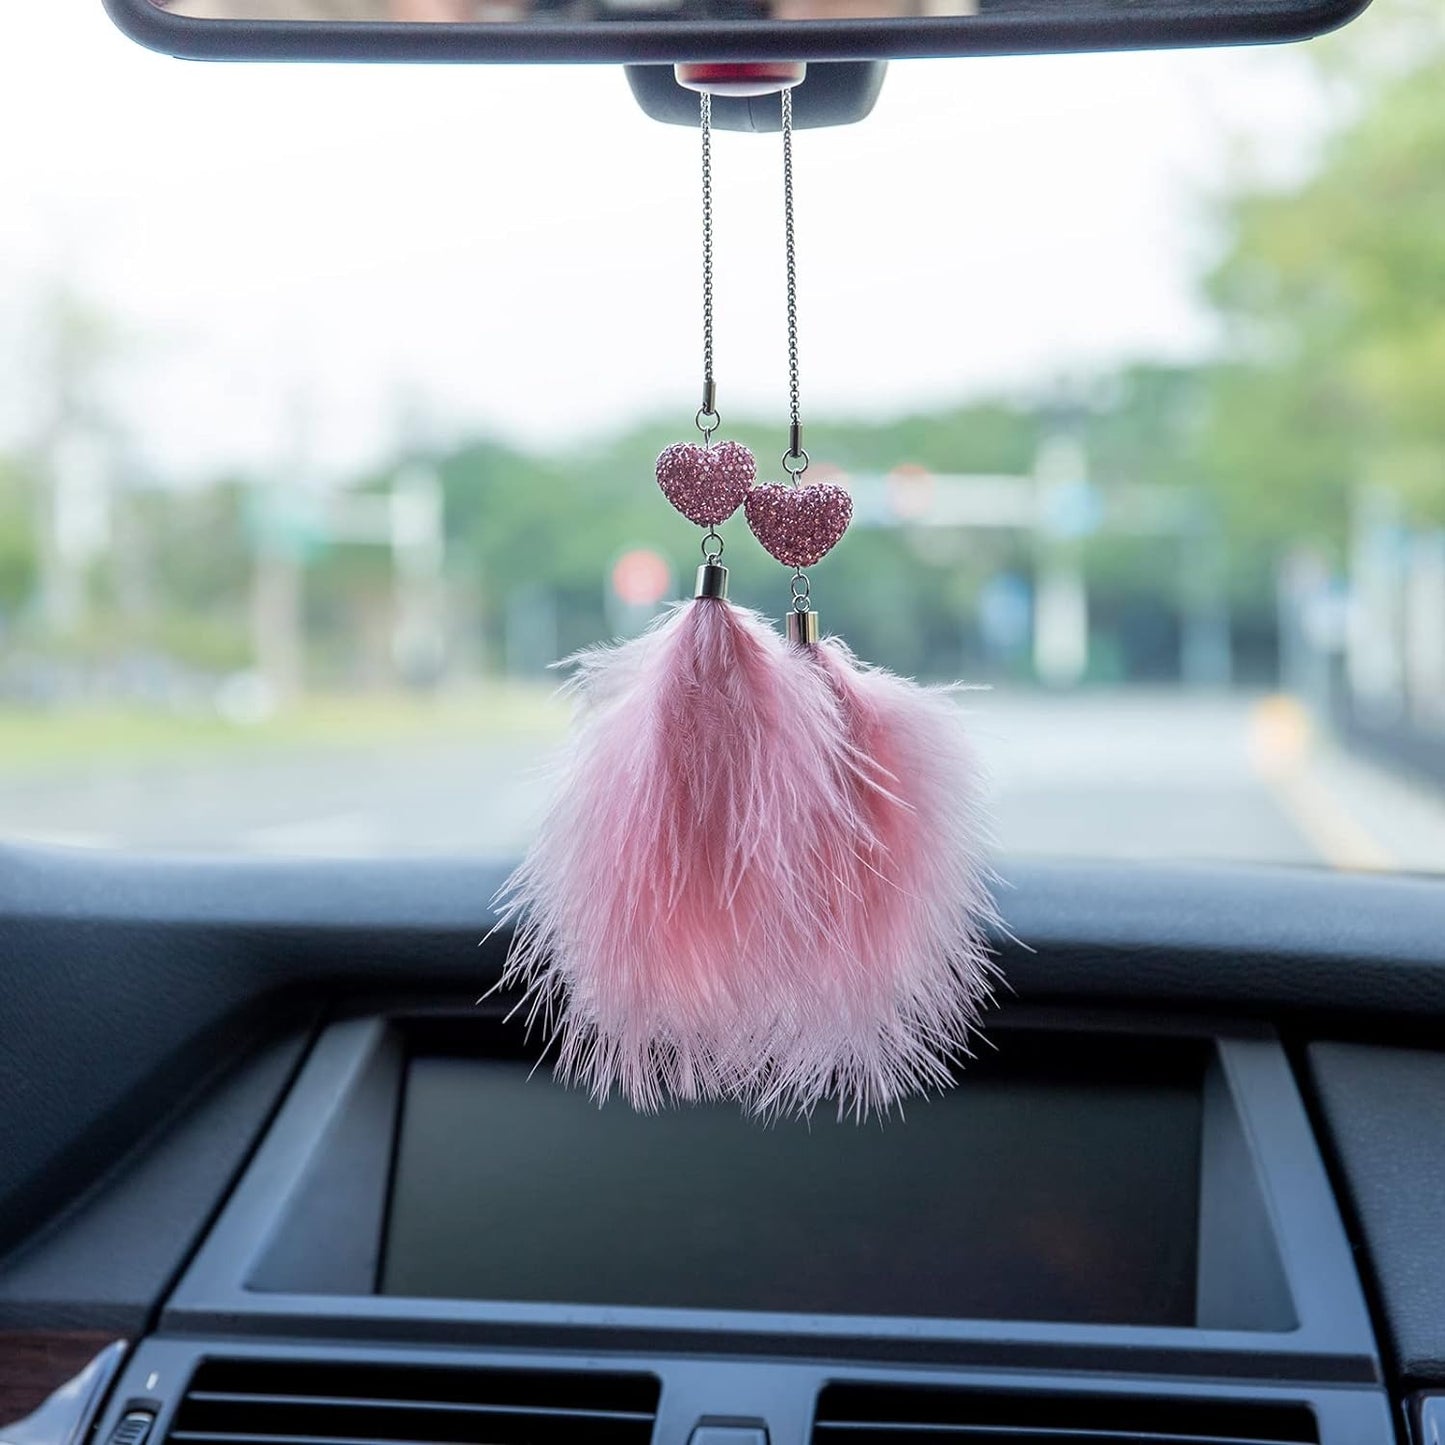 Spurtar Bling Car Mirror Hanging Accessories for Women Shiny Heart Shape Crystal Diamond Car Ornament with Plush Feather Pendant Rearview M